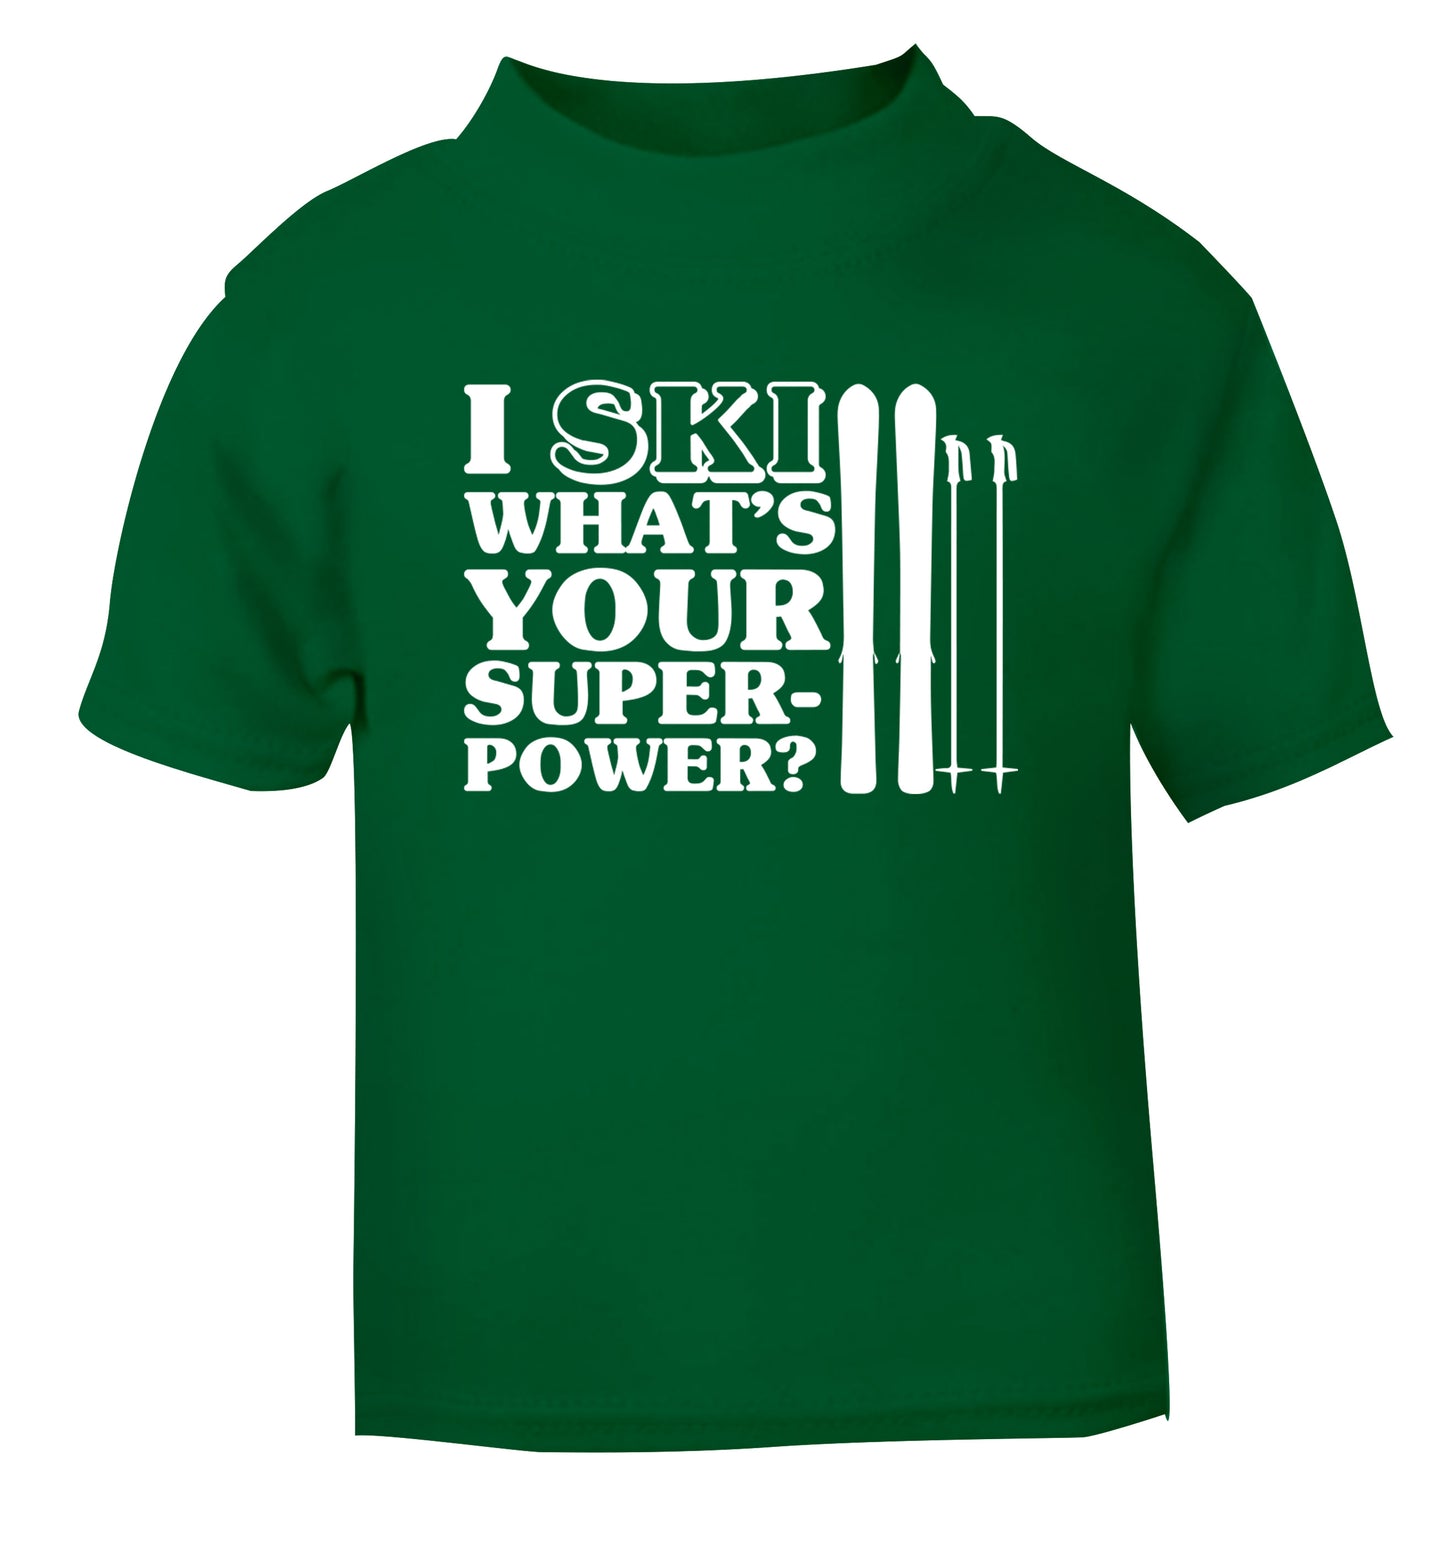 I ski what's your superpower? green Baby Toddler Tshirt 2 Years